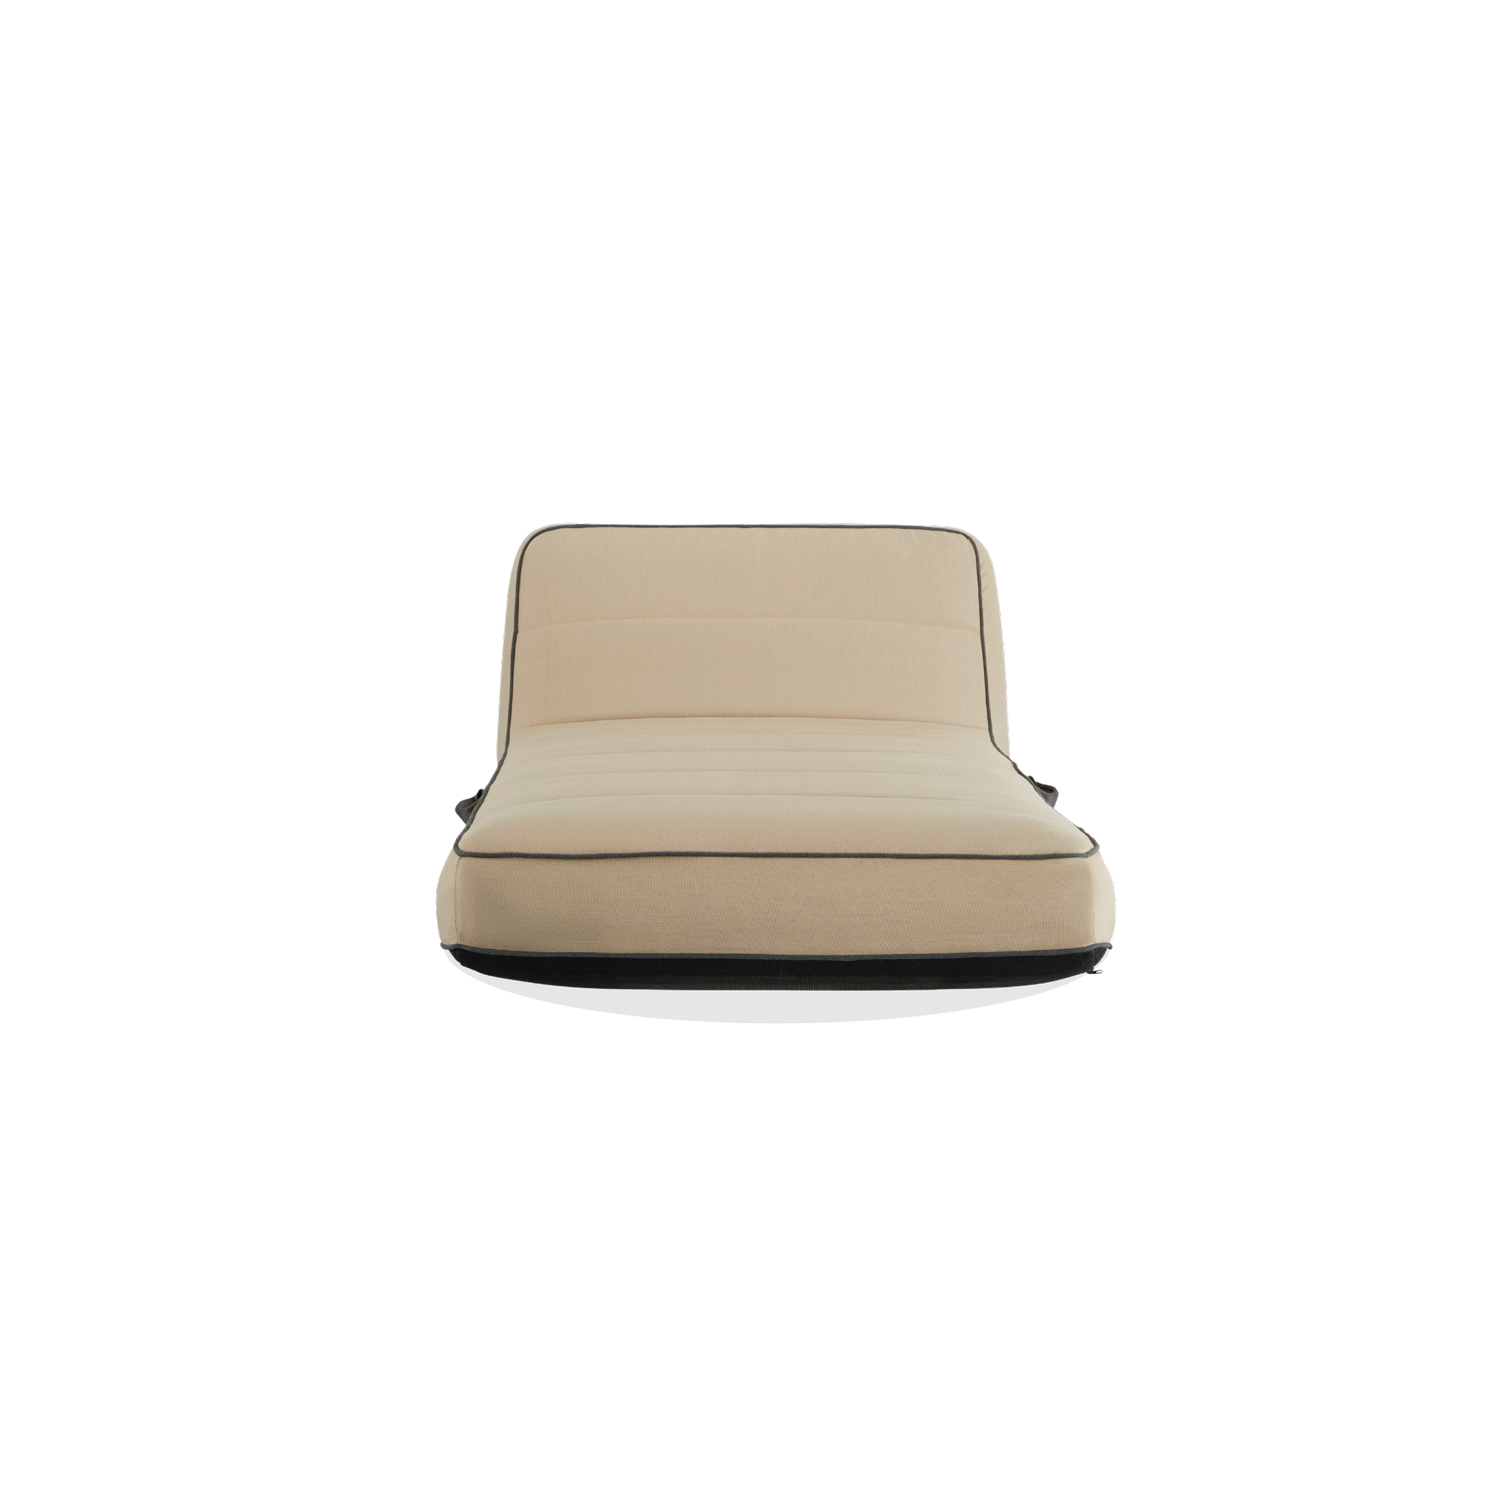 The front profile of a single brown tan luxury pool float.